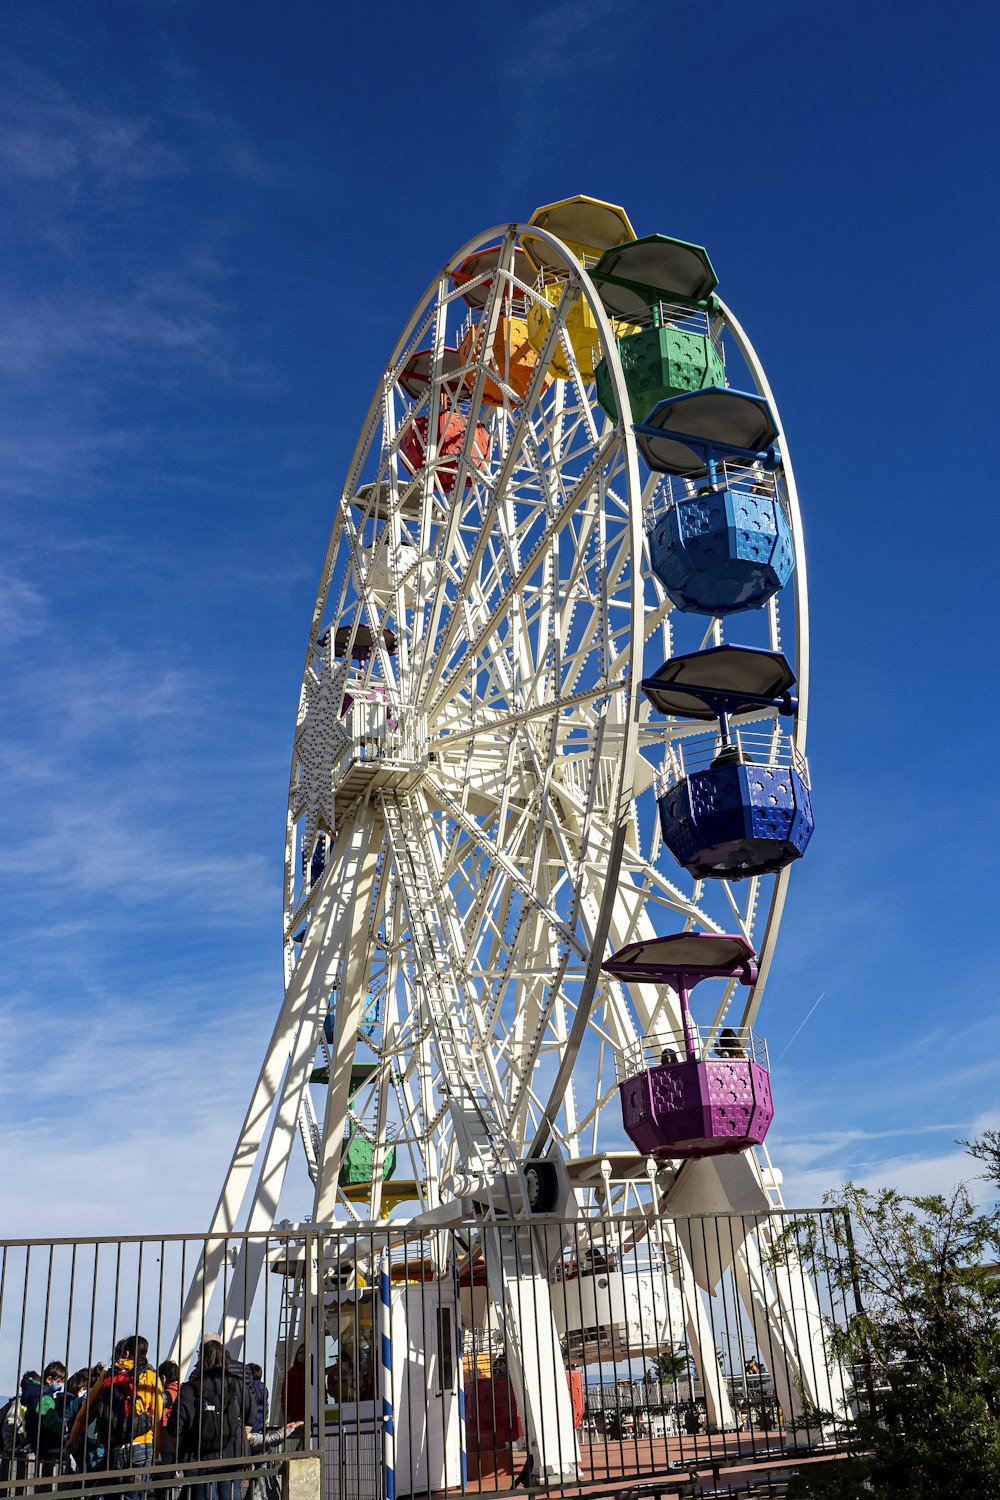 a ferris wheel with a lot of colorful bags on it